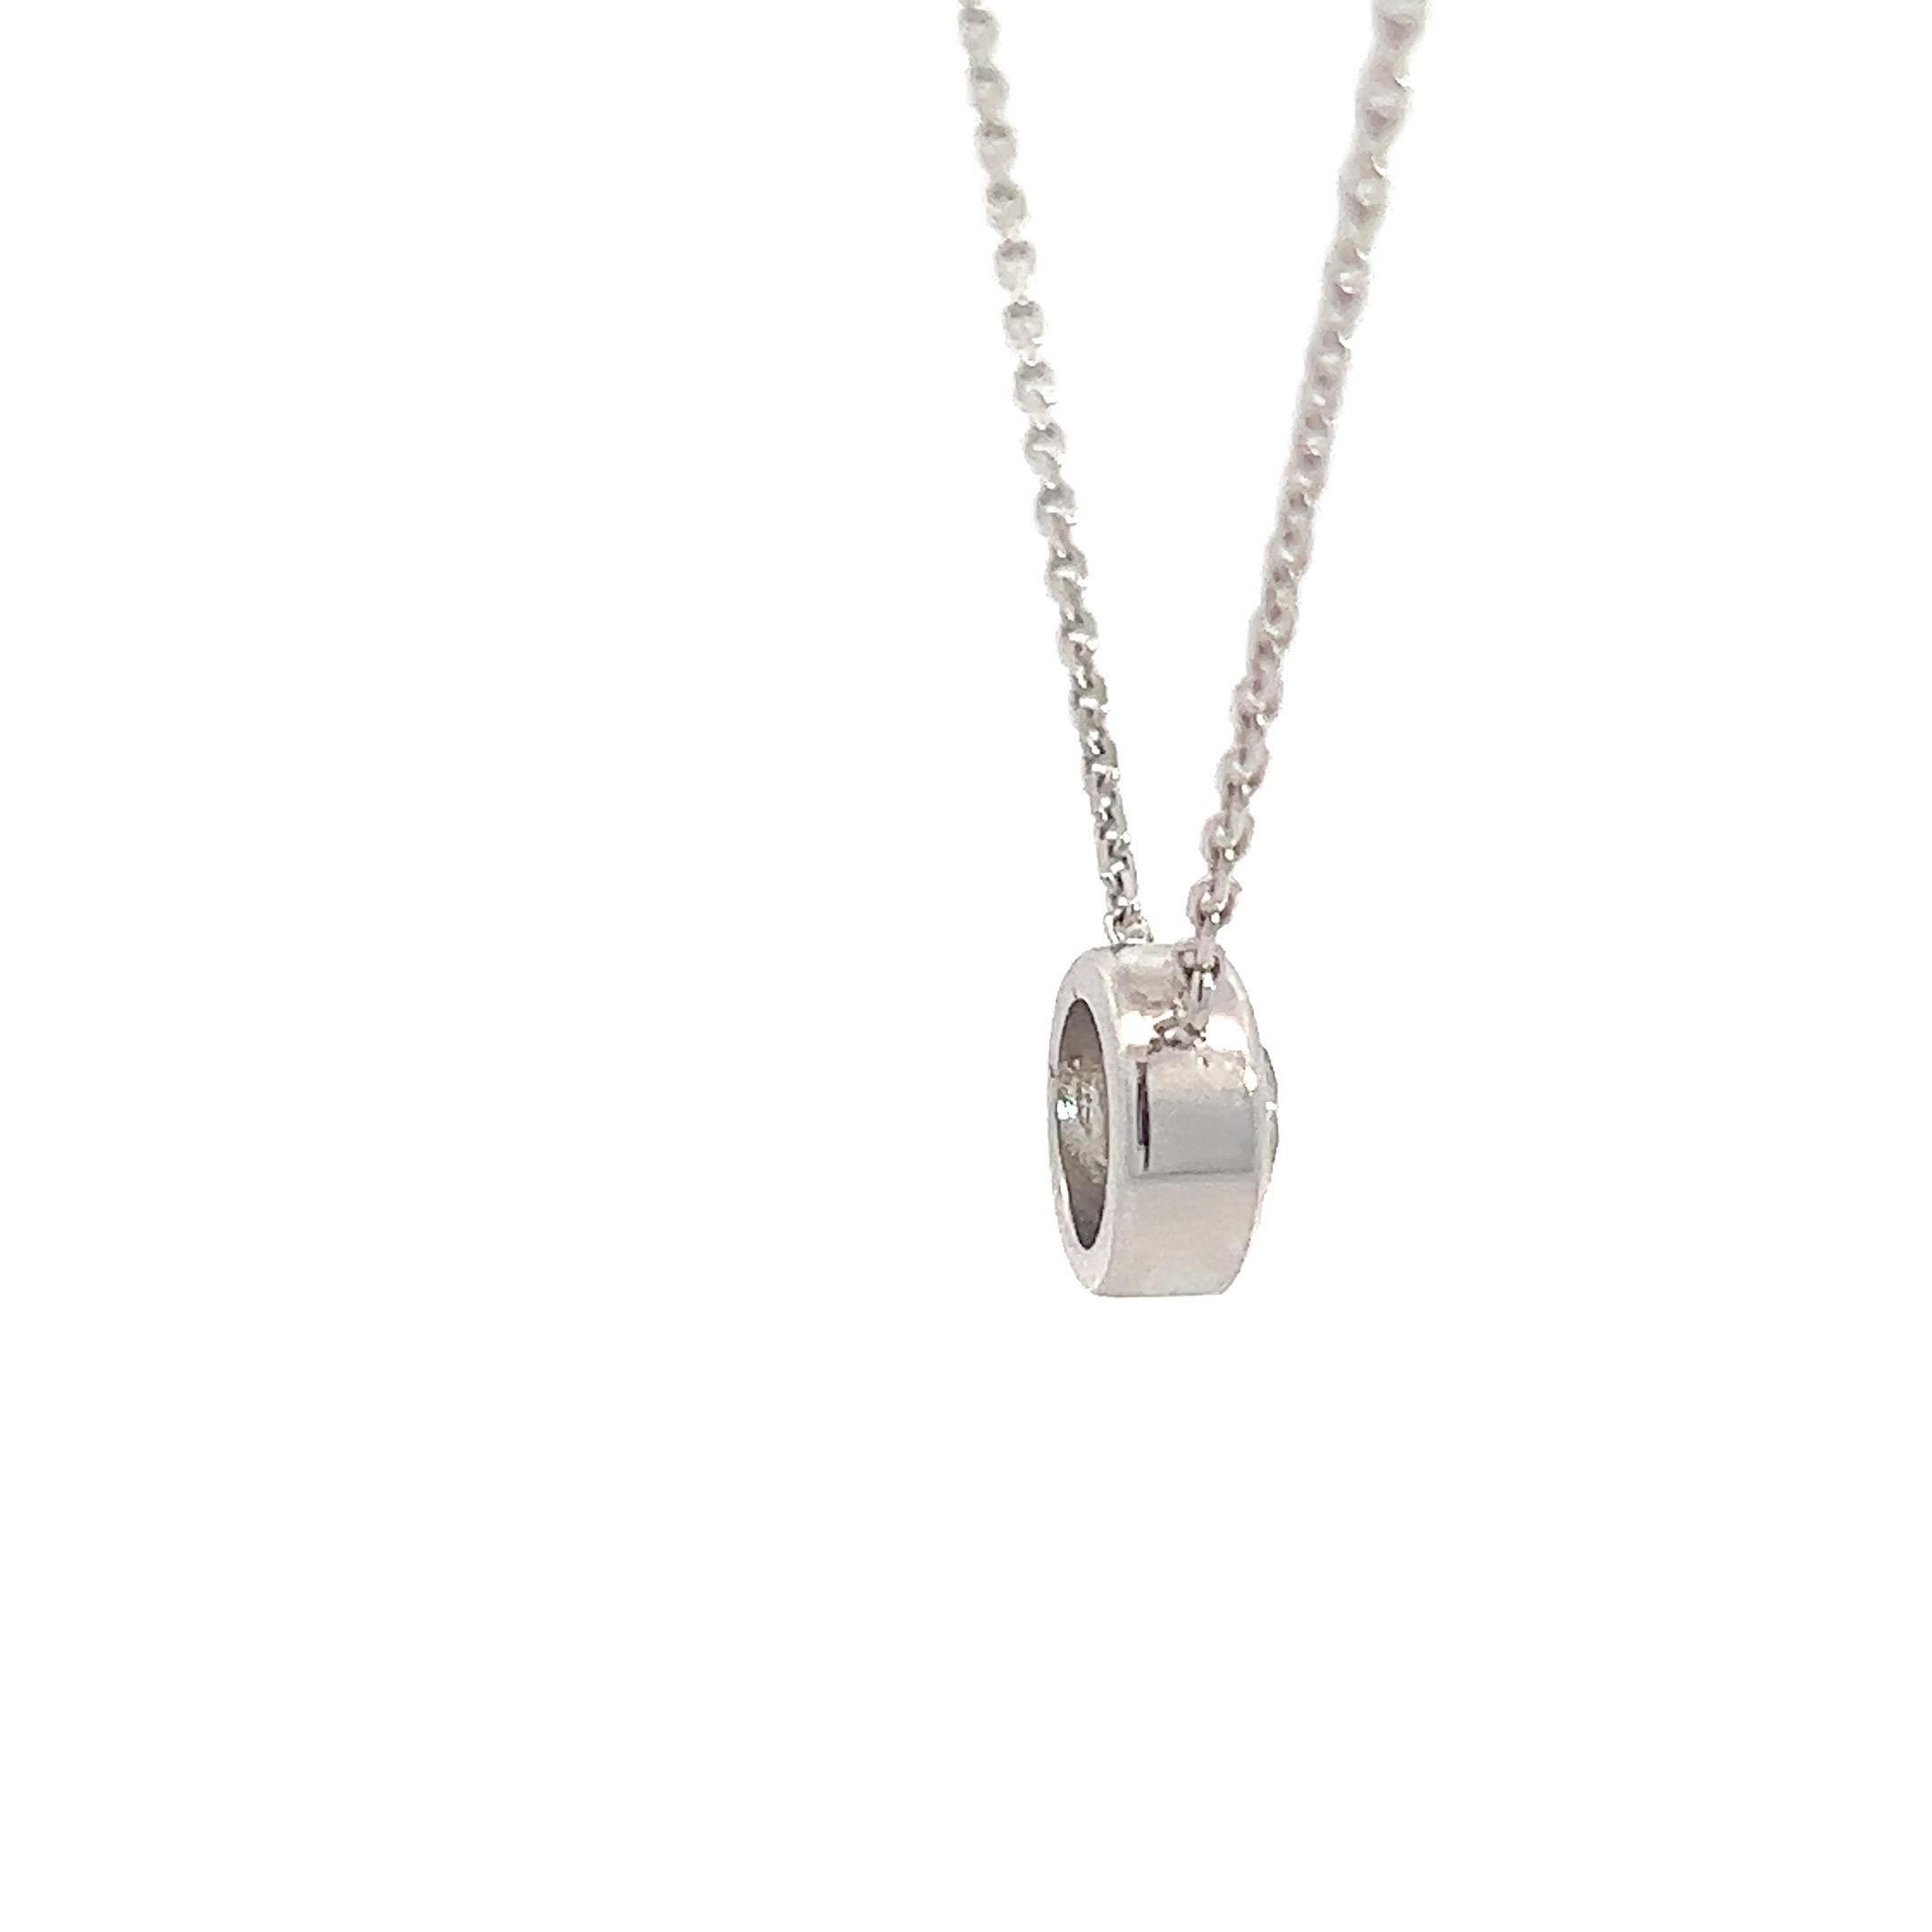 Solitaire Diamond Pendant 
0.78 Carat Natural Brilliant Cut Diamond, mounted in a 14k White Gold Bezel set Pendant.
Perfect gift for your special person.
Punto Luce